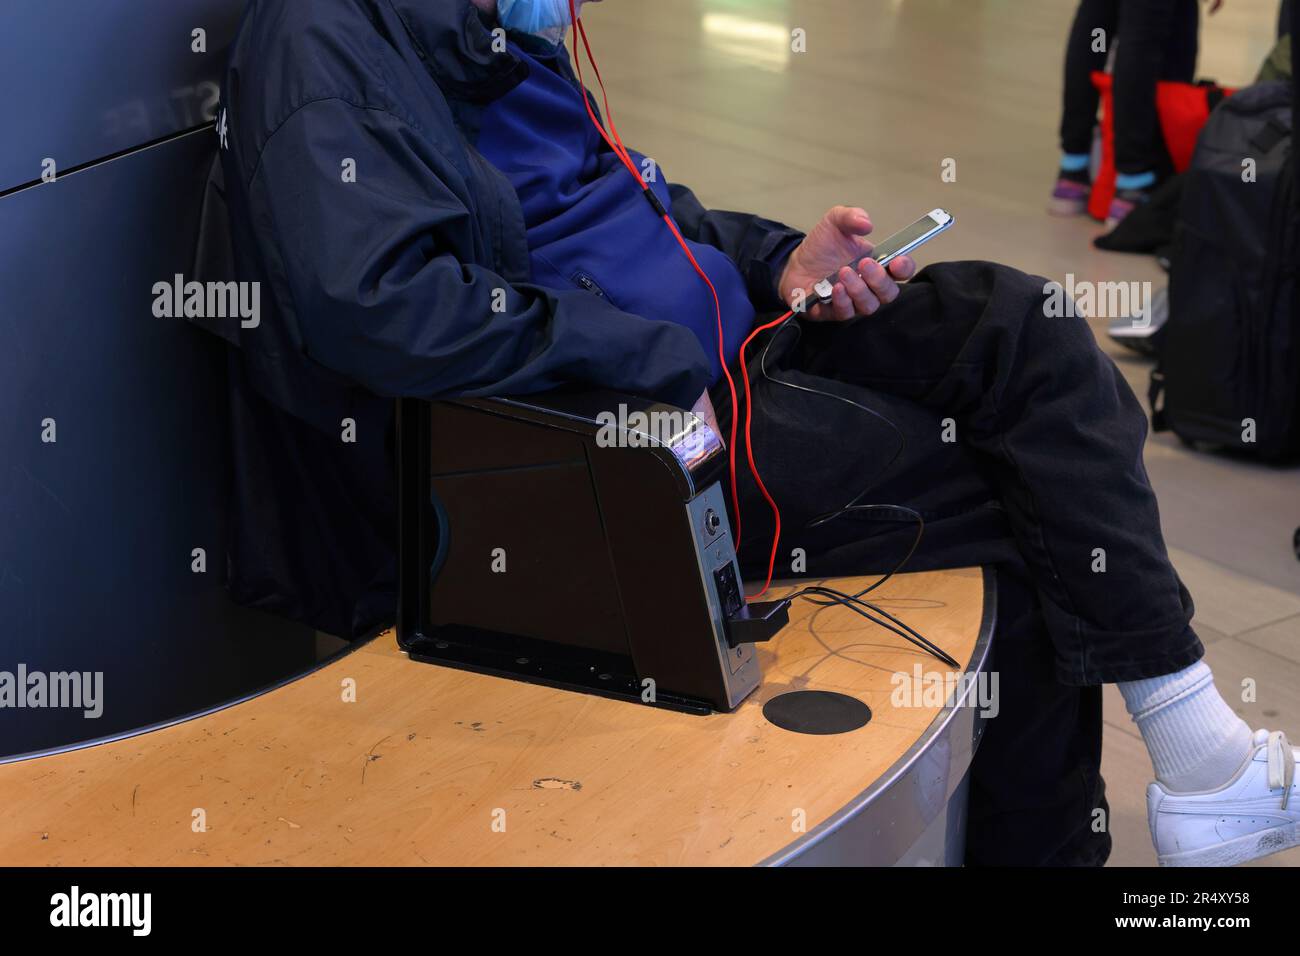 A person simultaneously listens to music while charging a smartphone from an electrical outlet in a public waiting area. Stock Photo